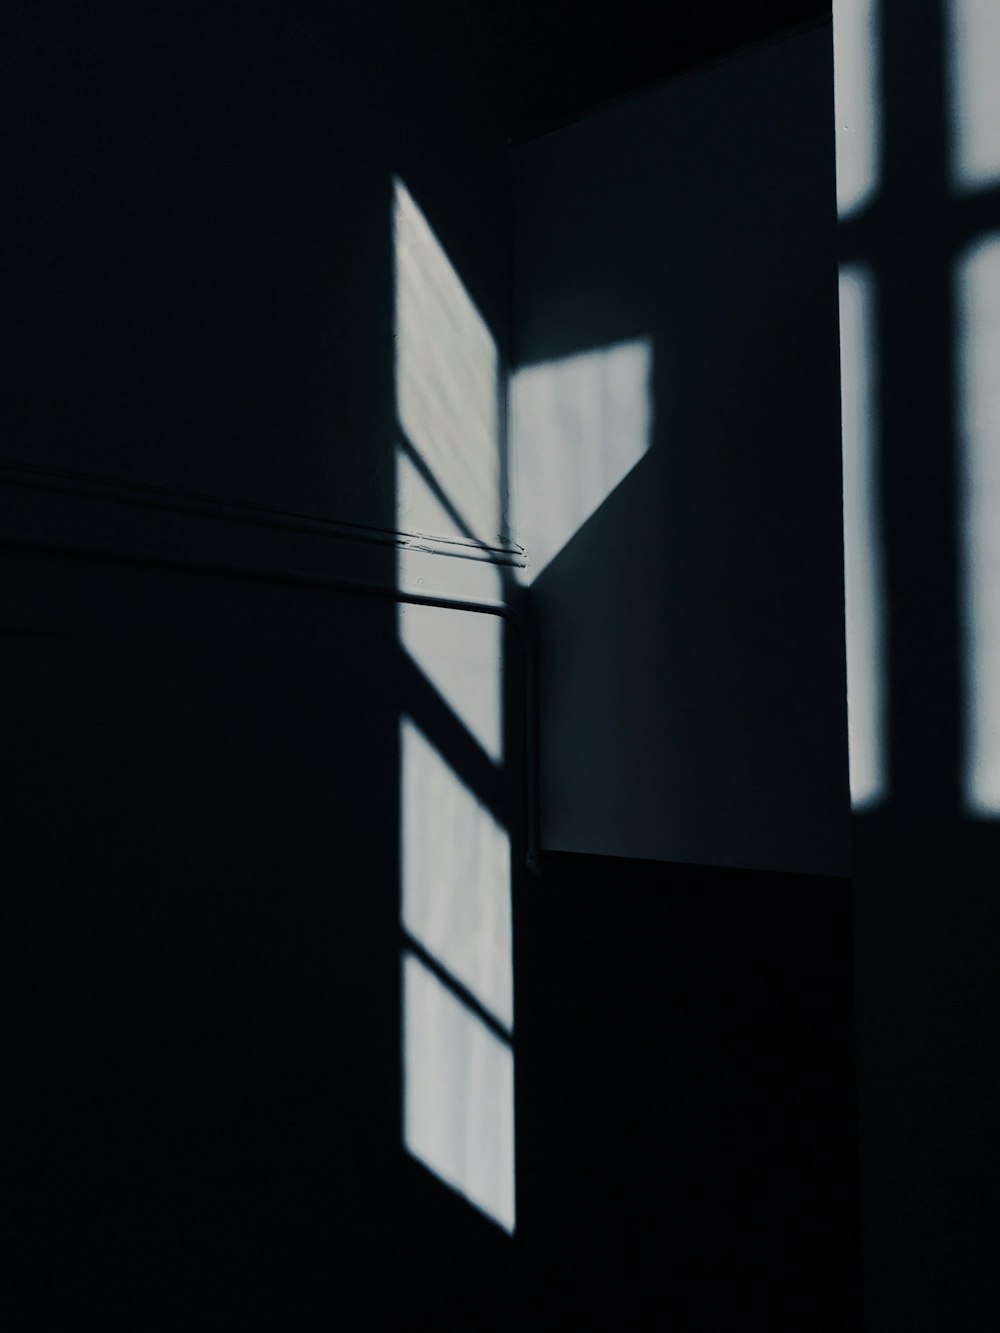 the shadow of a window in a dark room